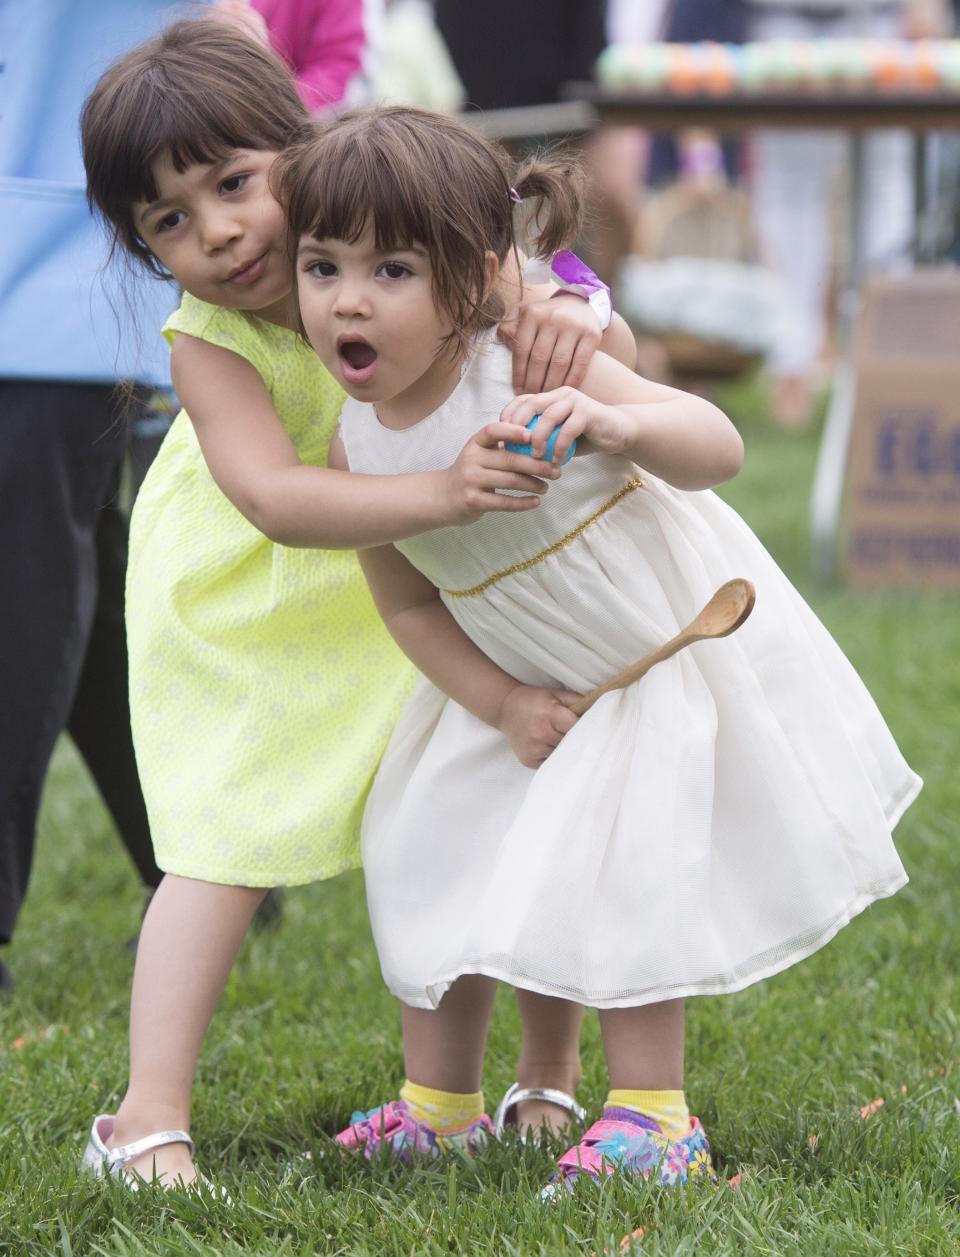 Children participate in an Easter egg roll race during the 139th White House Easter Egg Roll.